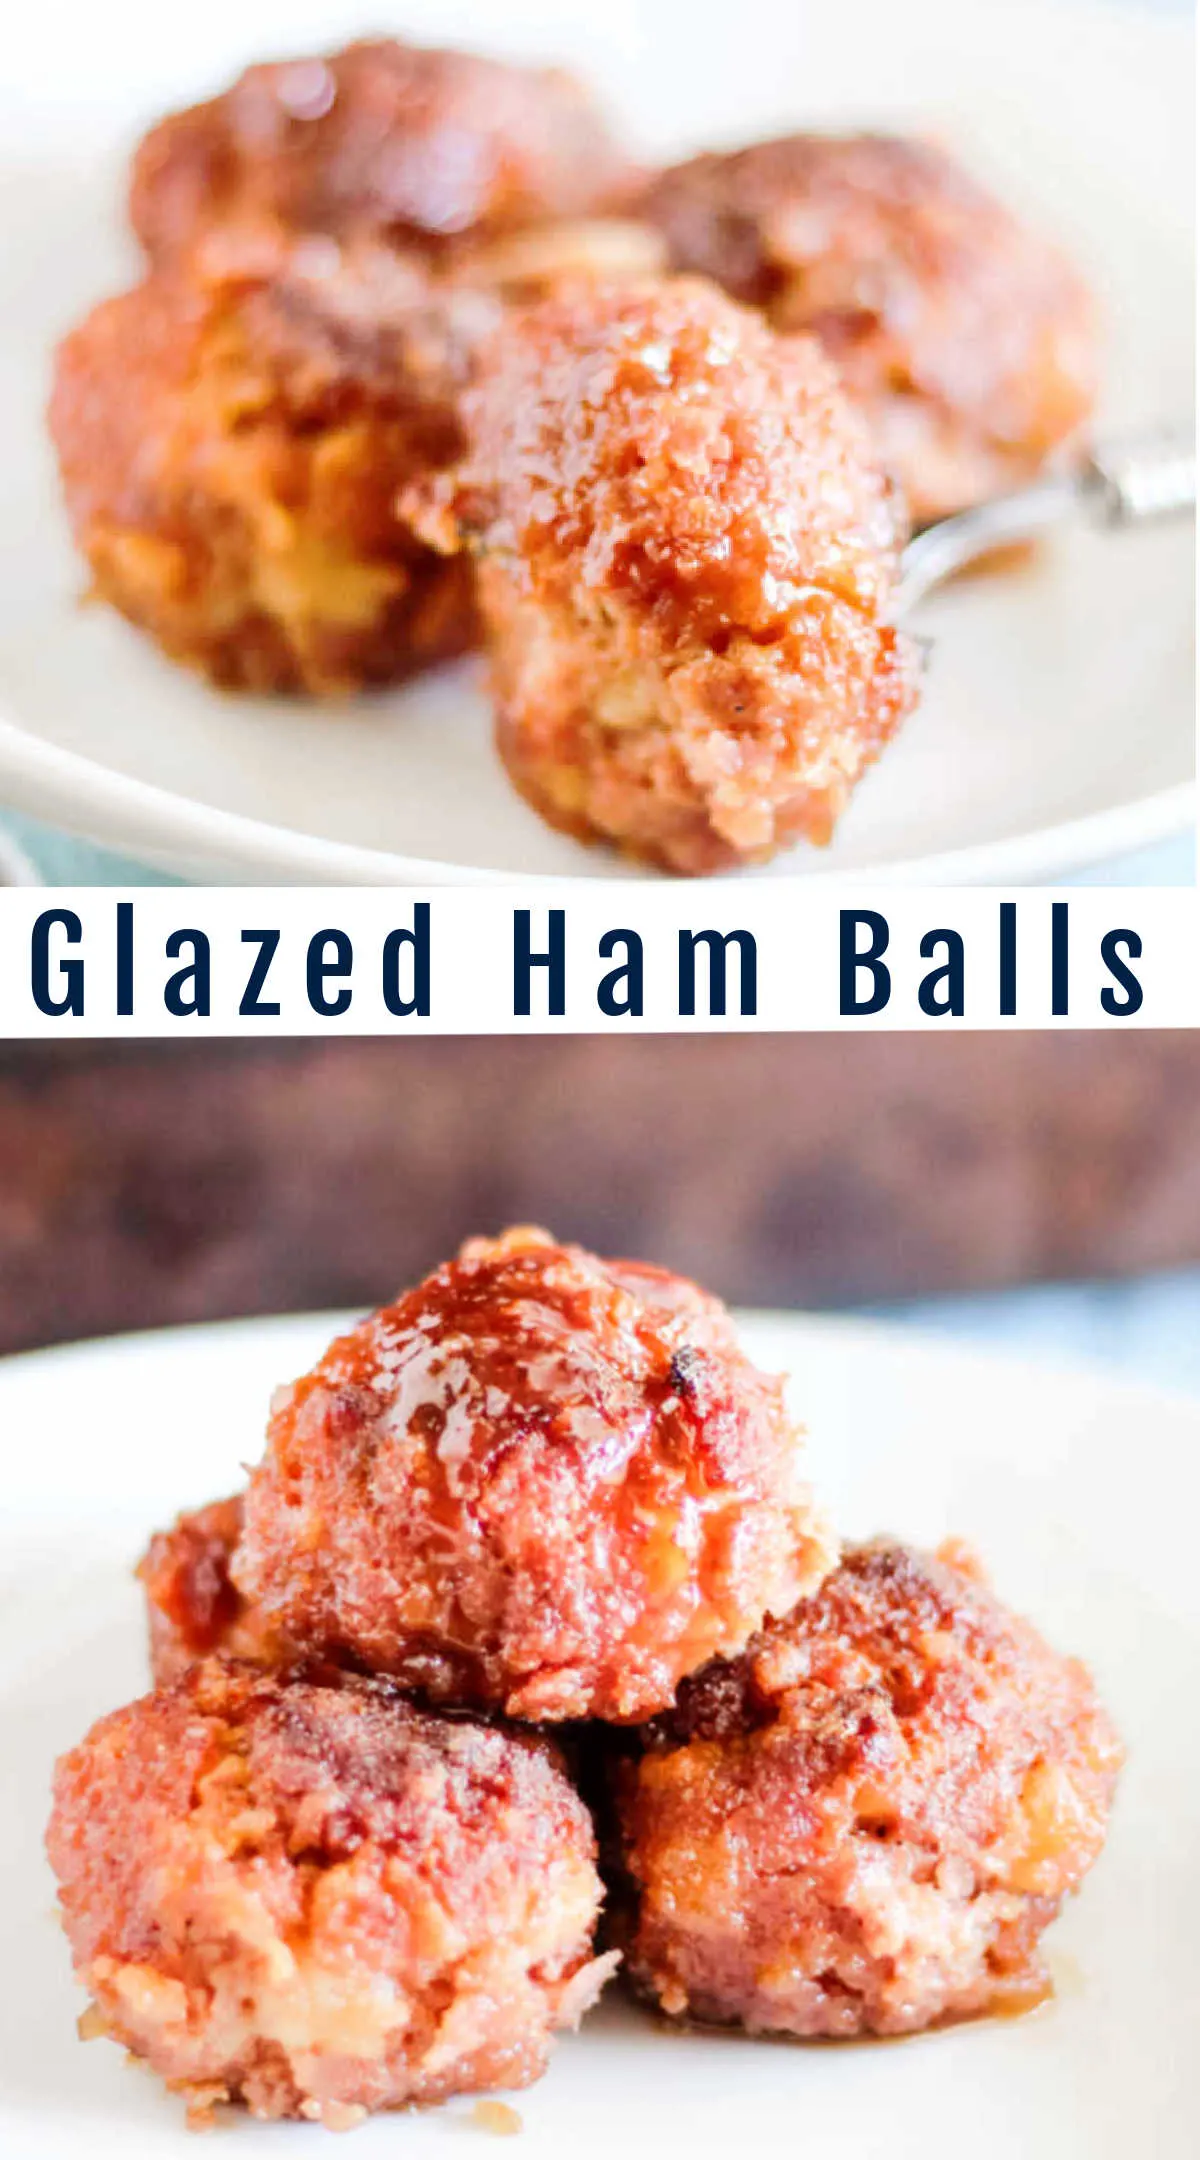 Ham balls are an Iowa tradition and for good reason, they are delicious! They are a great way to use leftover ham or a great excuse to put a ham on your shopping list.